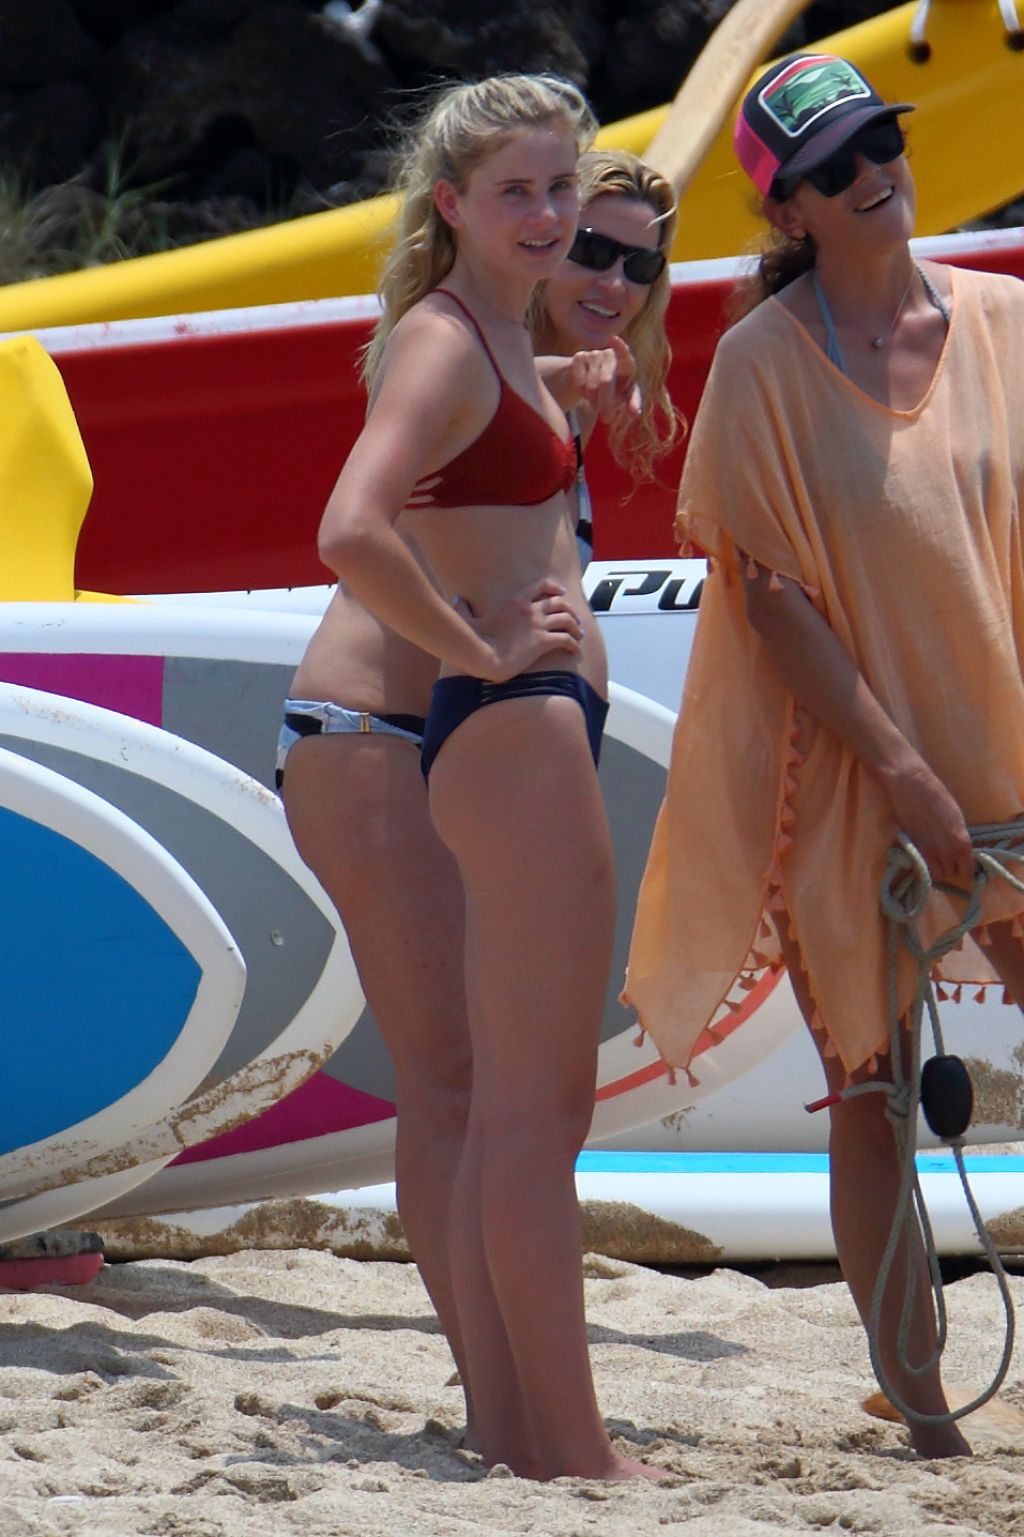 Mason Grammer And Mom Camille Grammer In Their Bikinis On The Beach In